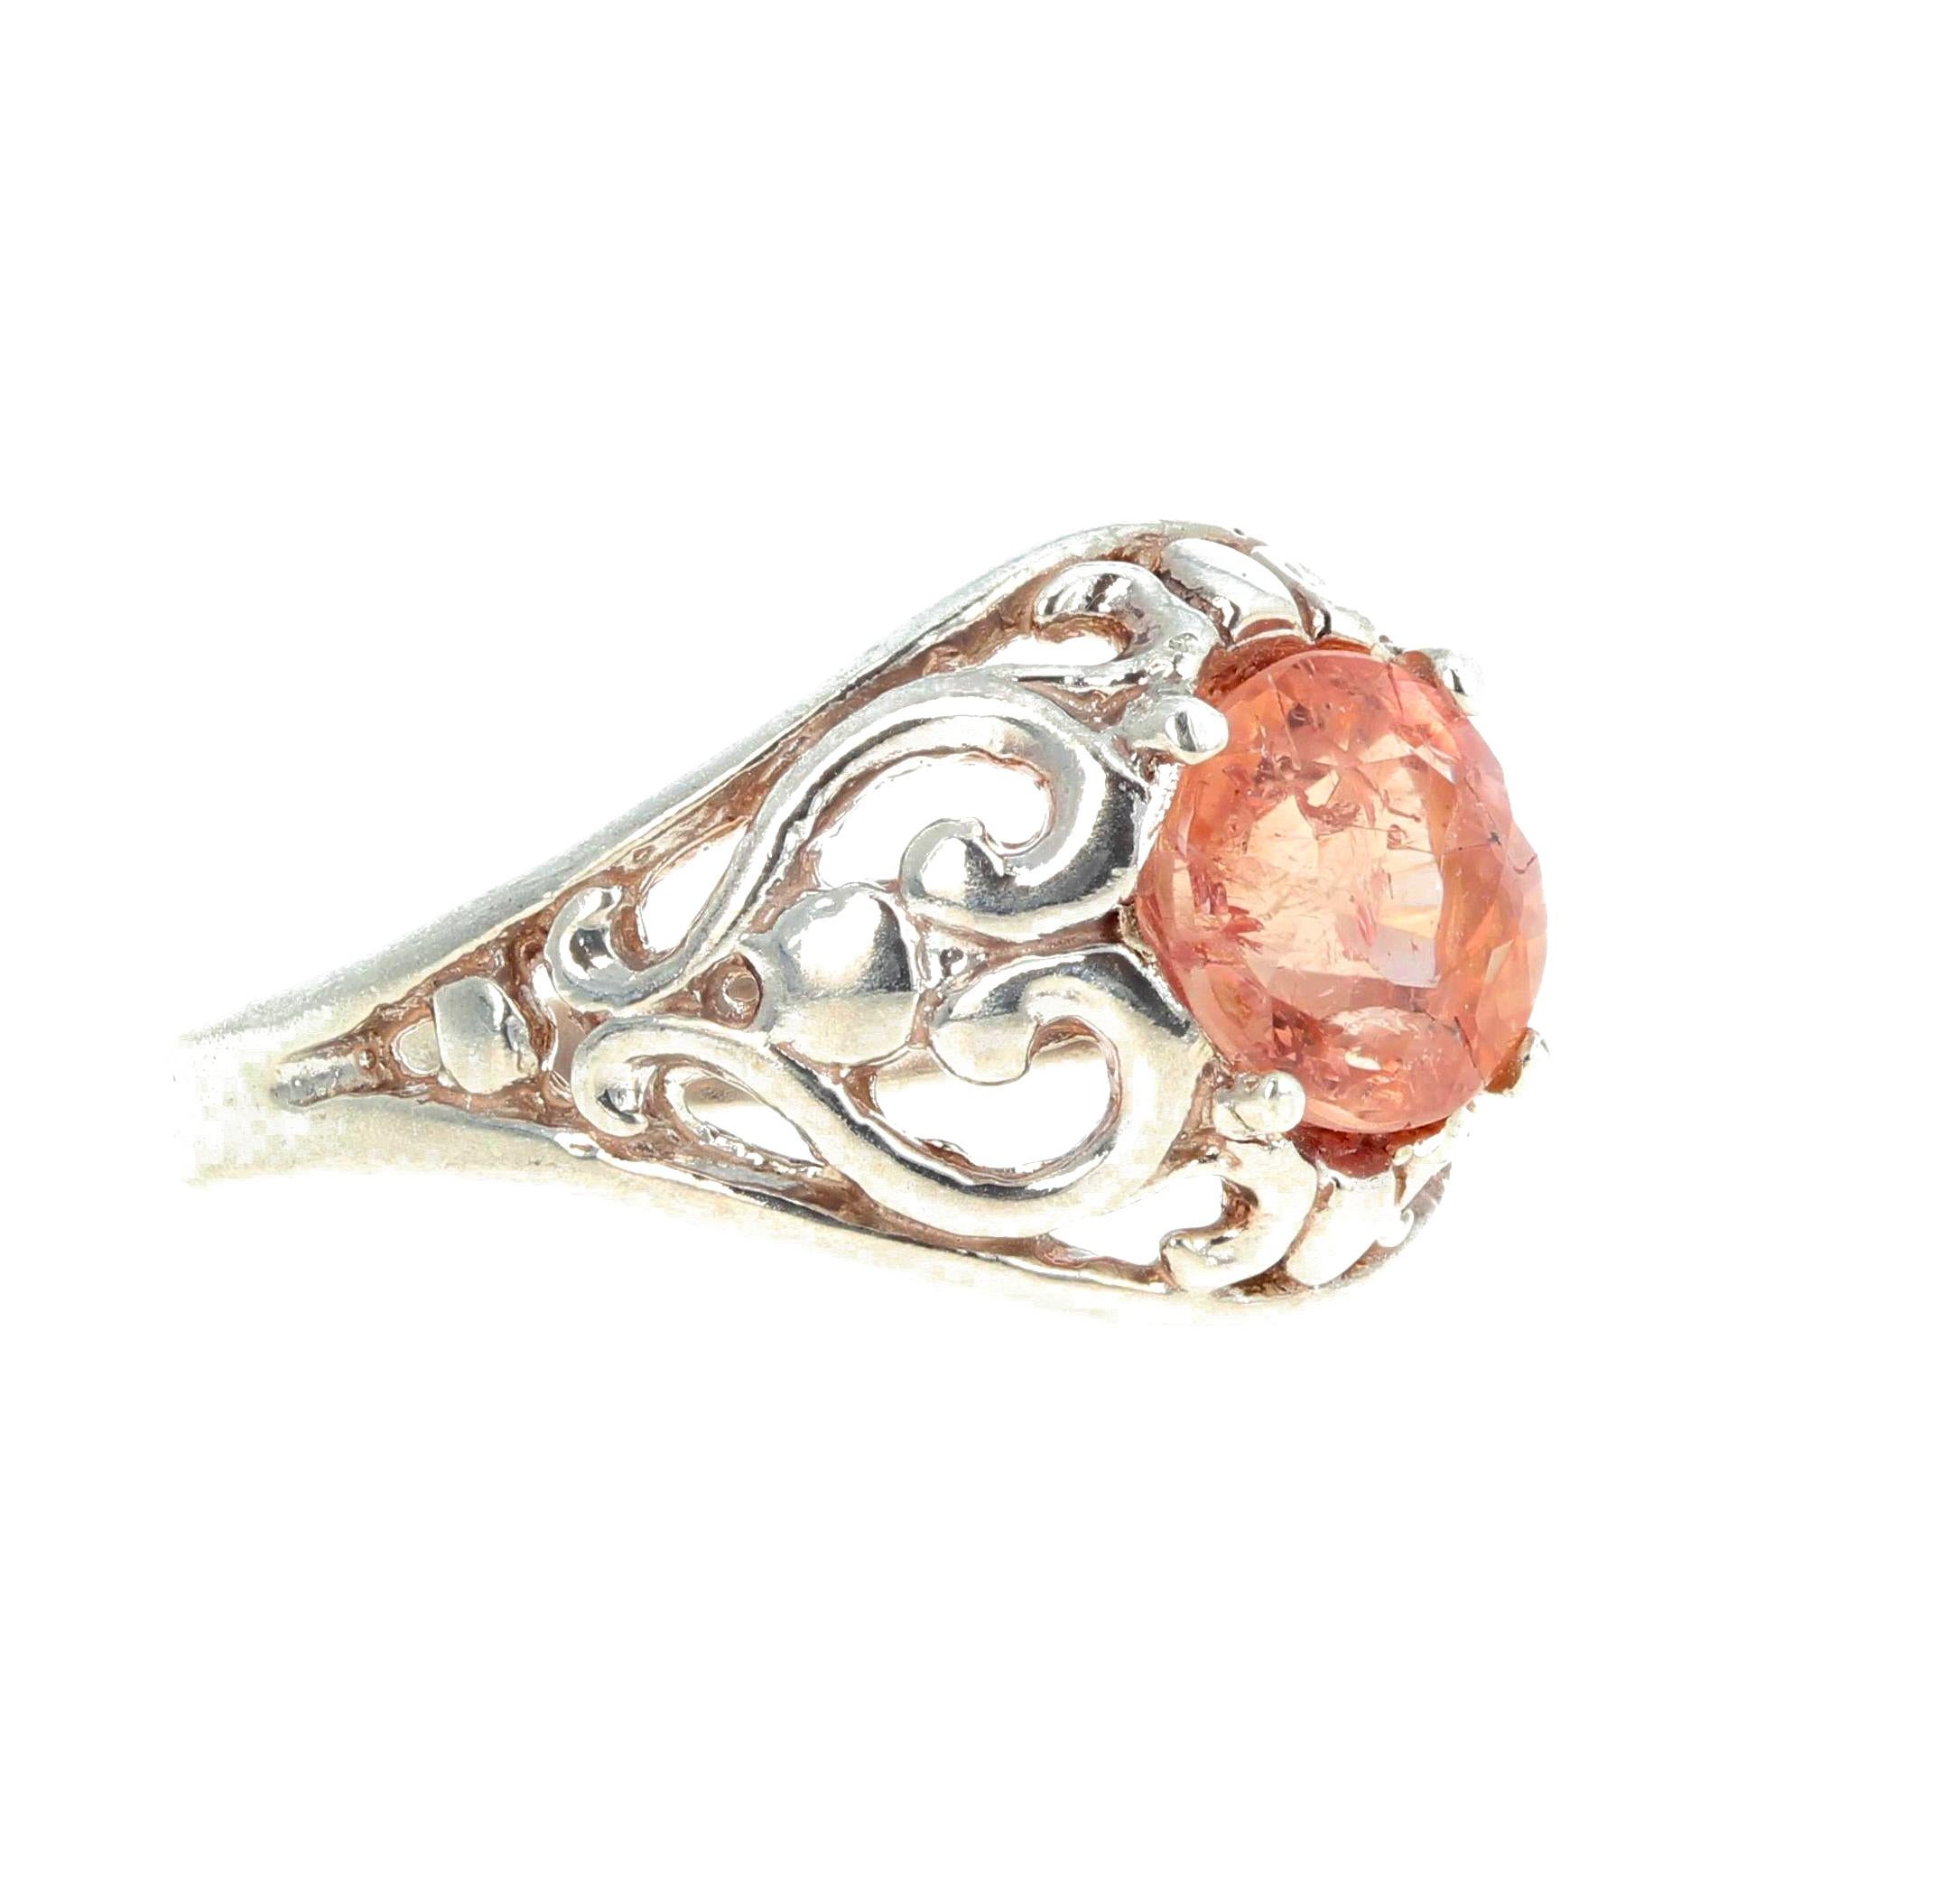 1.8 Carat Imperial Topaz Sterling Silver Ring 1